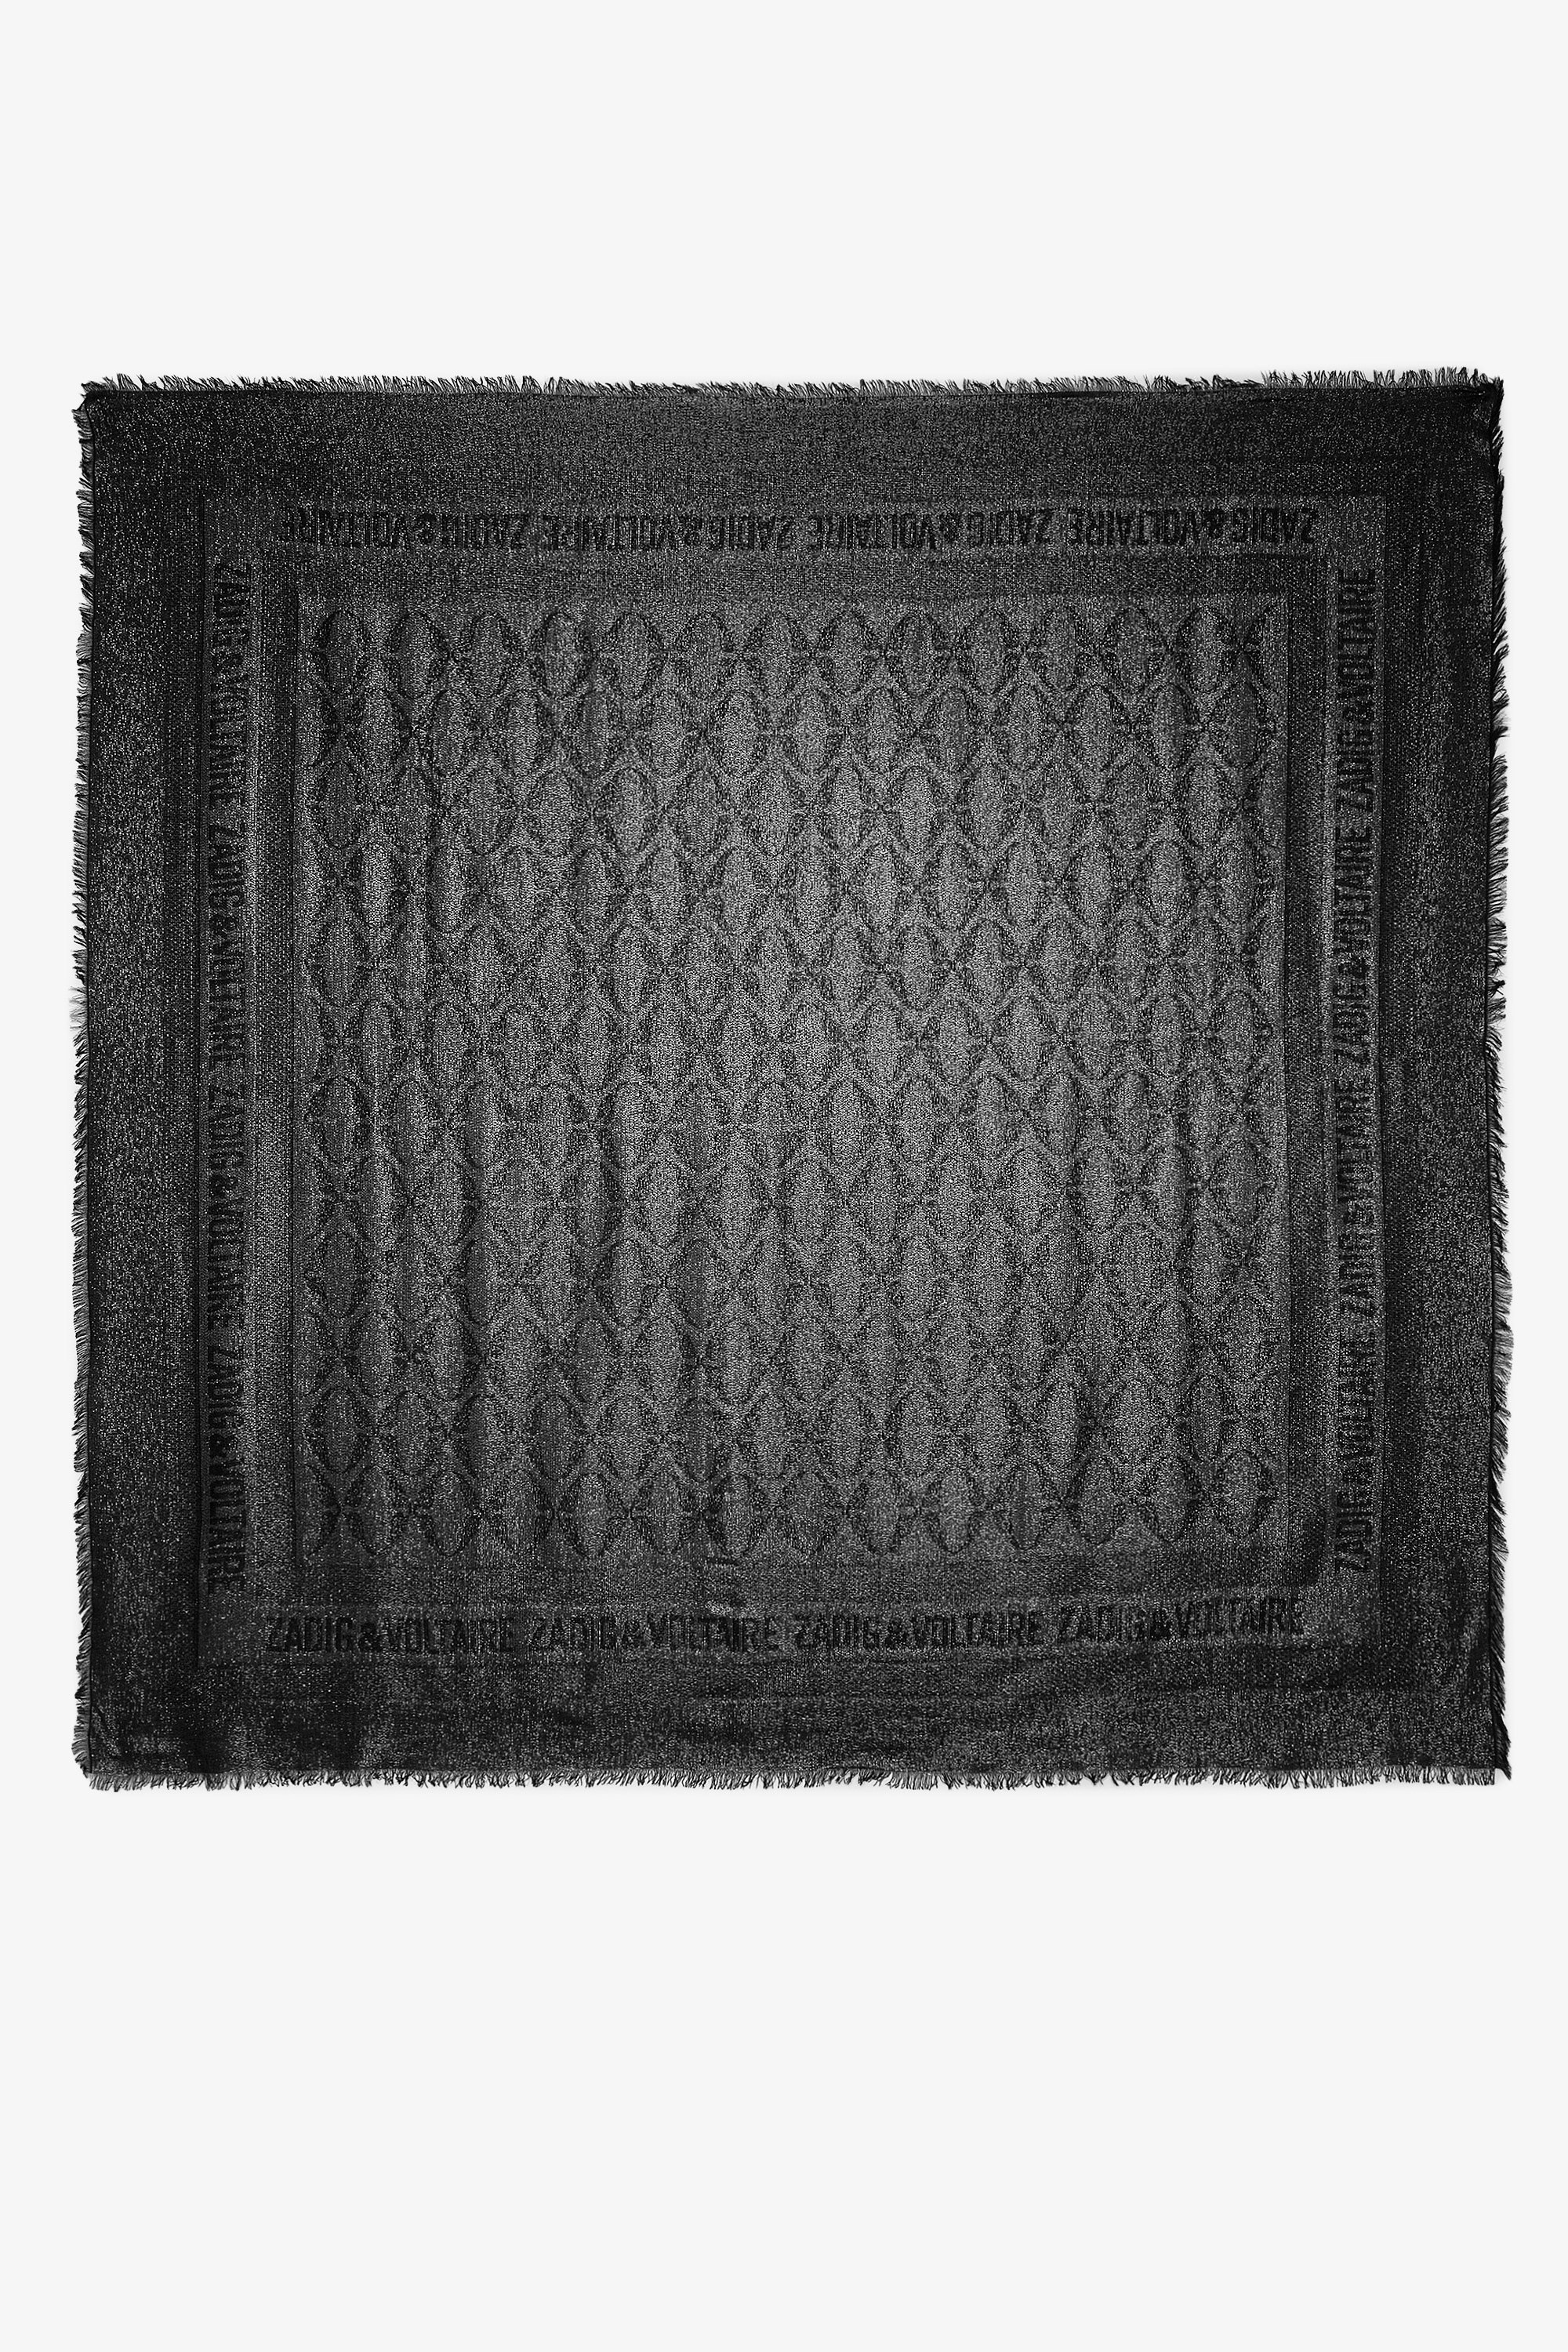 Glenn Rock Lurex Jacquard Scarf - Silver rectangular scarf in patterned jacquard with Zadig&Voltaire signature.